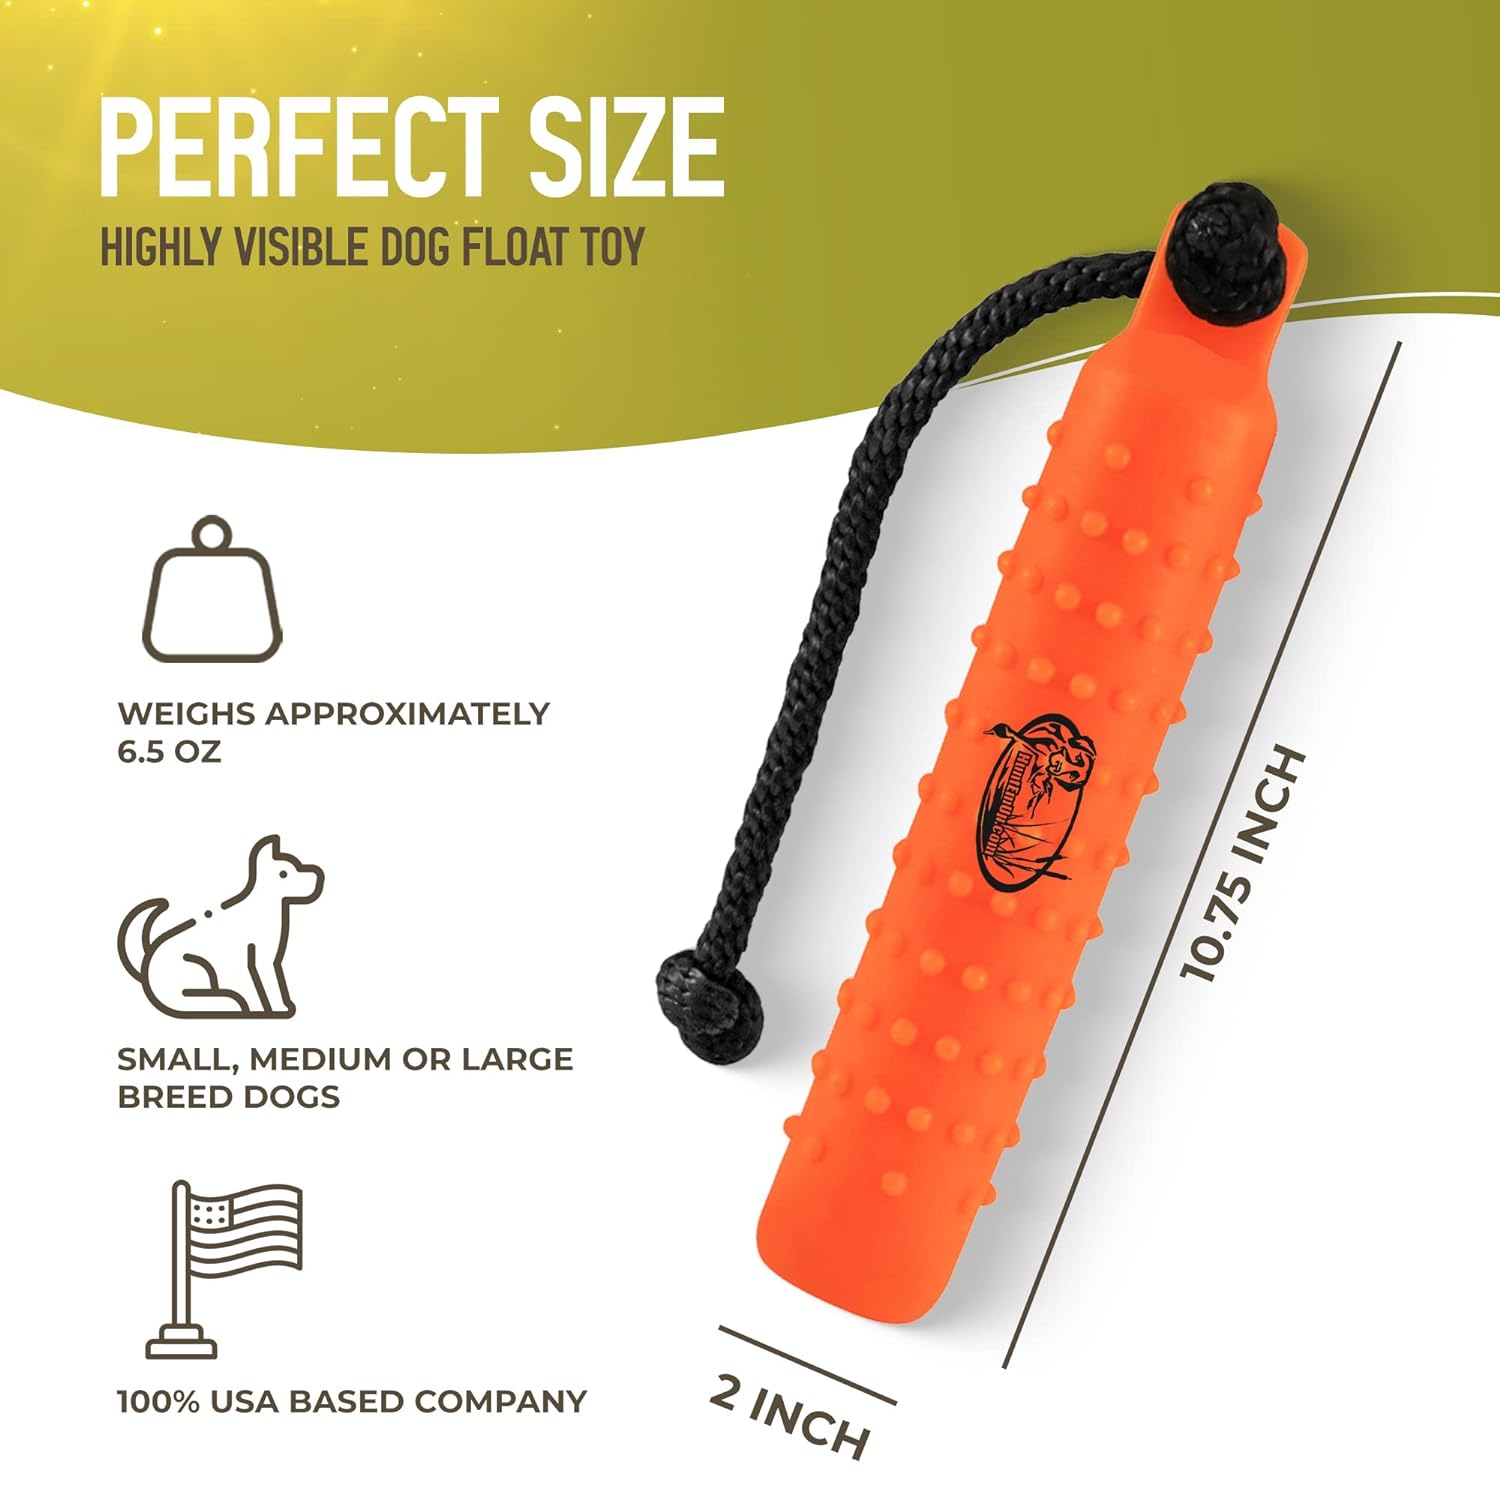 HuntEmUp Standard Size Plastic Dog Training Bumper with Throw Rope Dog Retrieving Dummy Duck Dog Hunting Training Tool Highly Visible Dog Float Toy – Orange